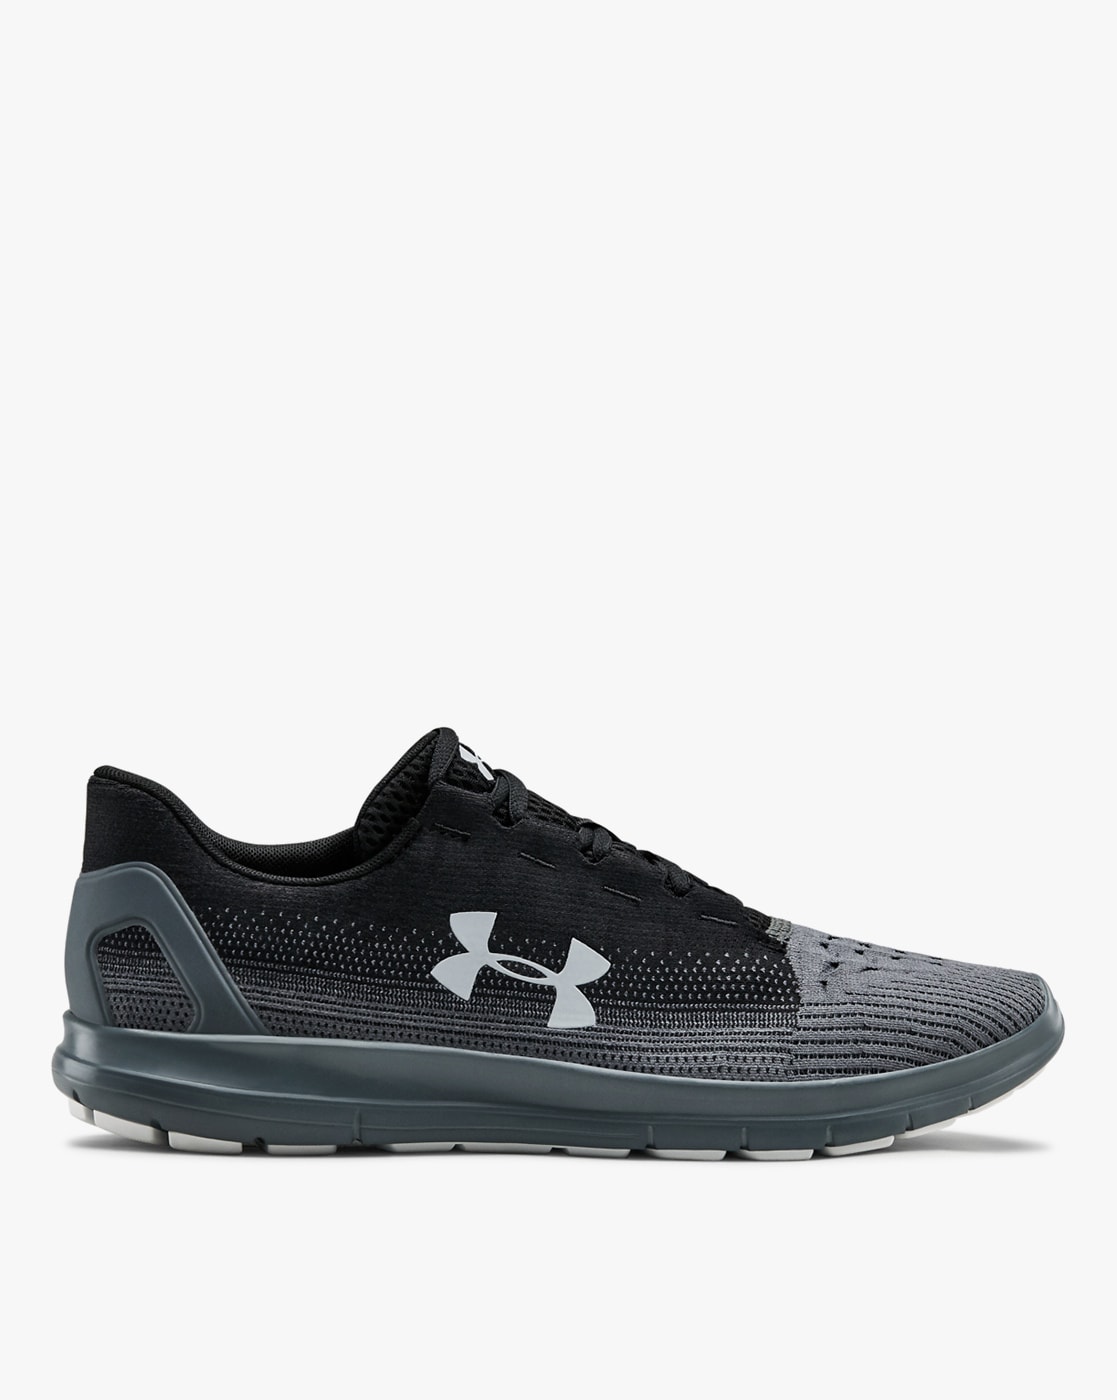 Under Armour Mens Ua Remix Running Shoes 